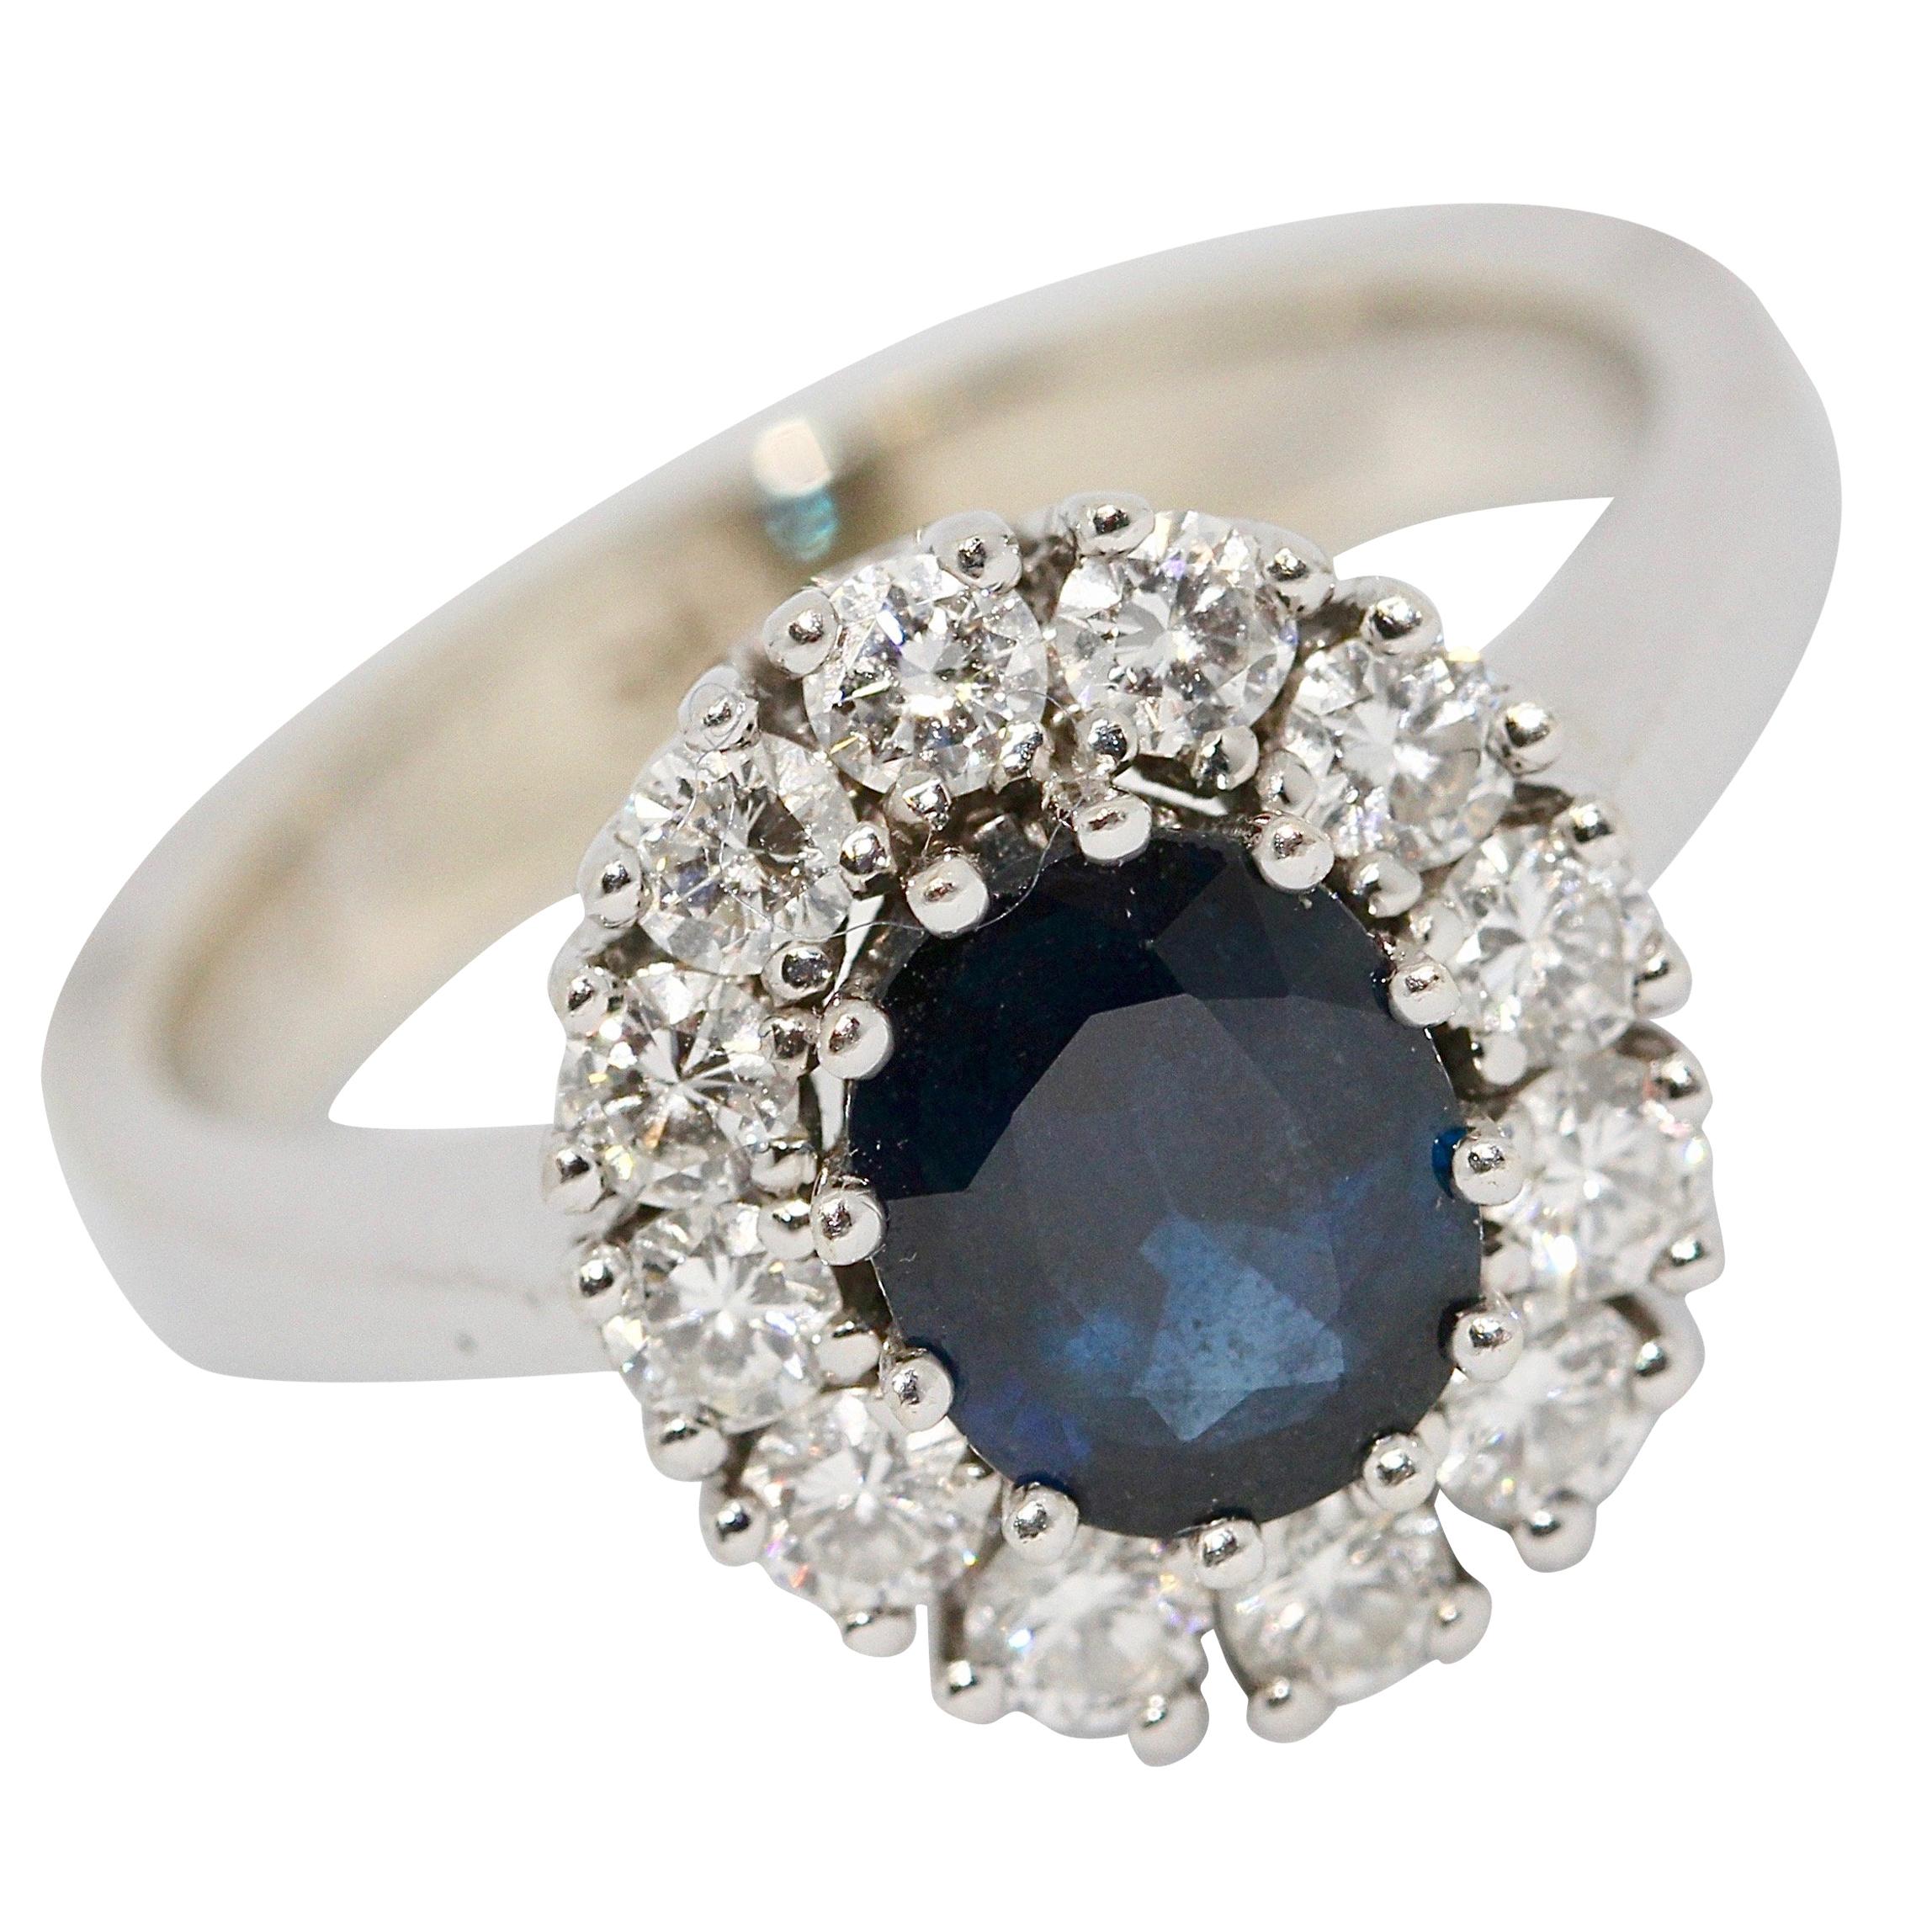 Luxurious Gold Ring with 1.17 Carat Natural Sapphire and 0.63 Carat Diamonds